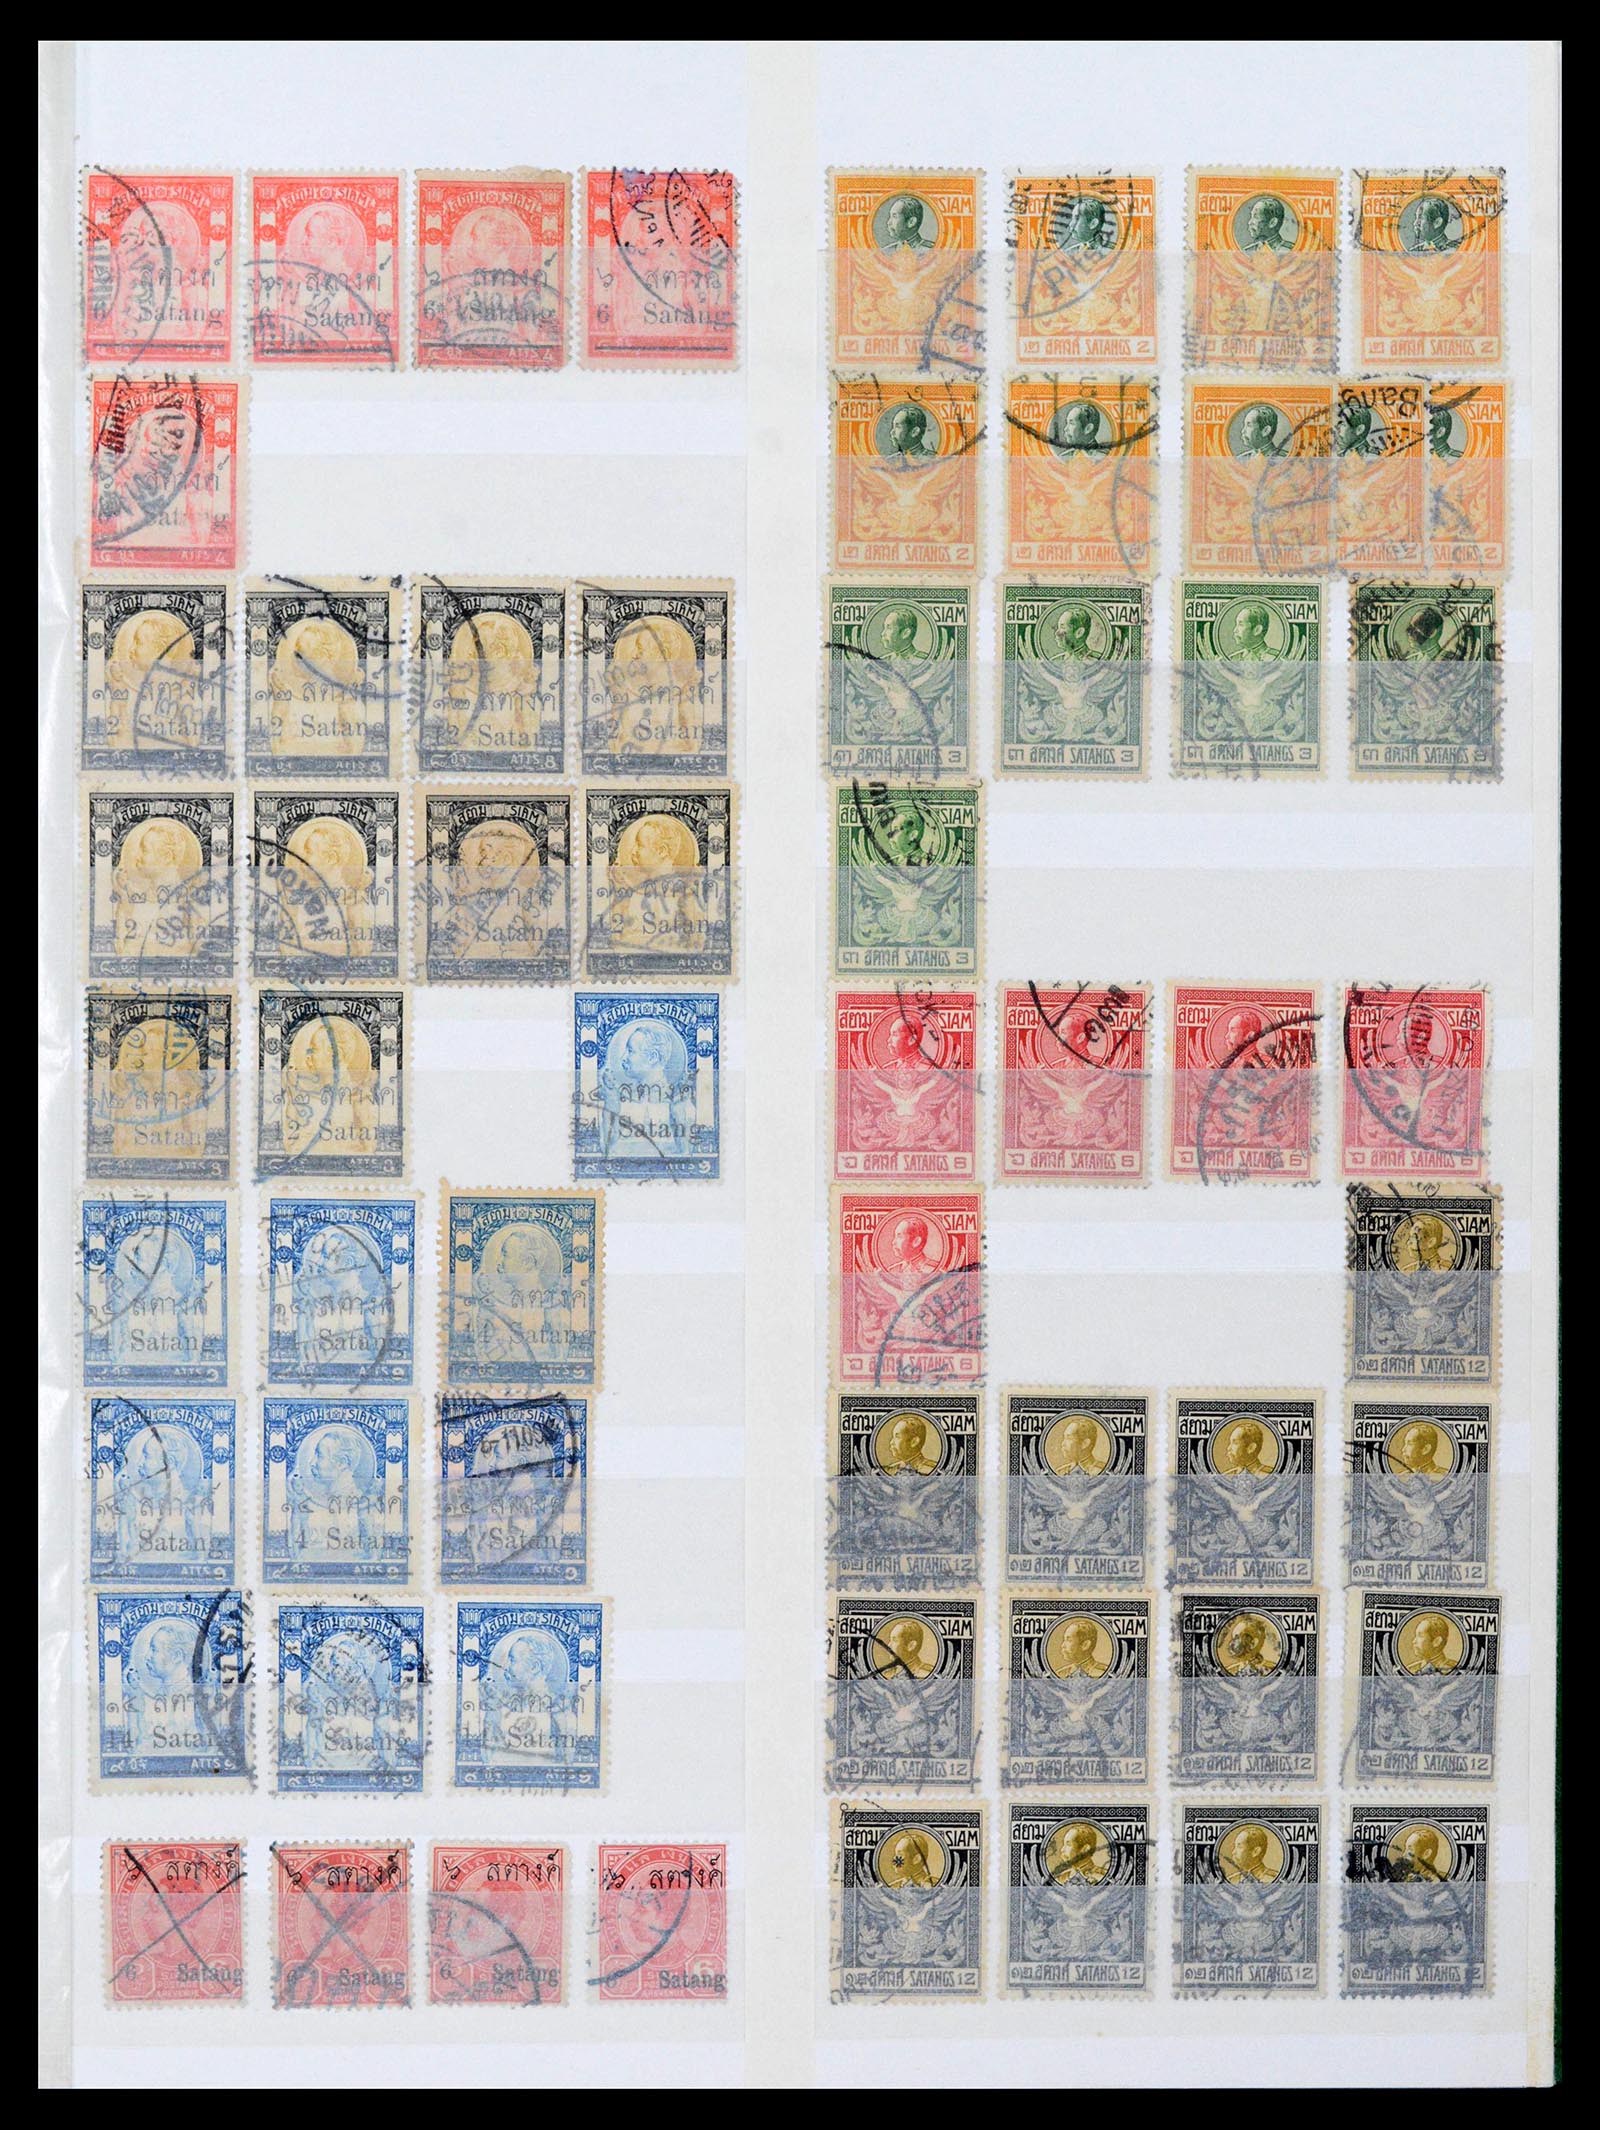 39384 0007 - Stamp collection 39384 Thailand 1883-2014.